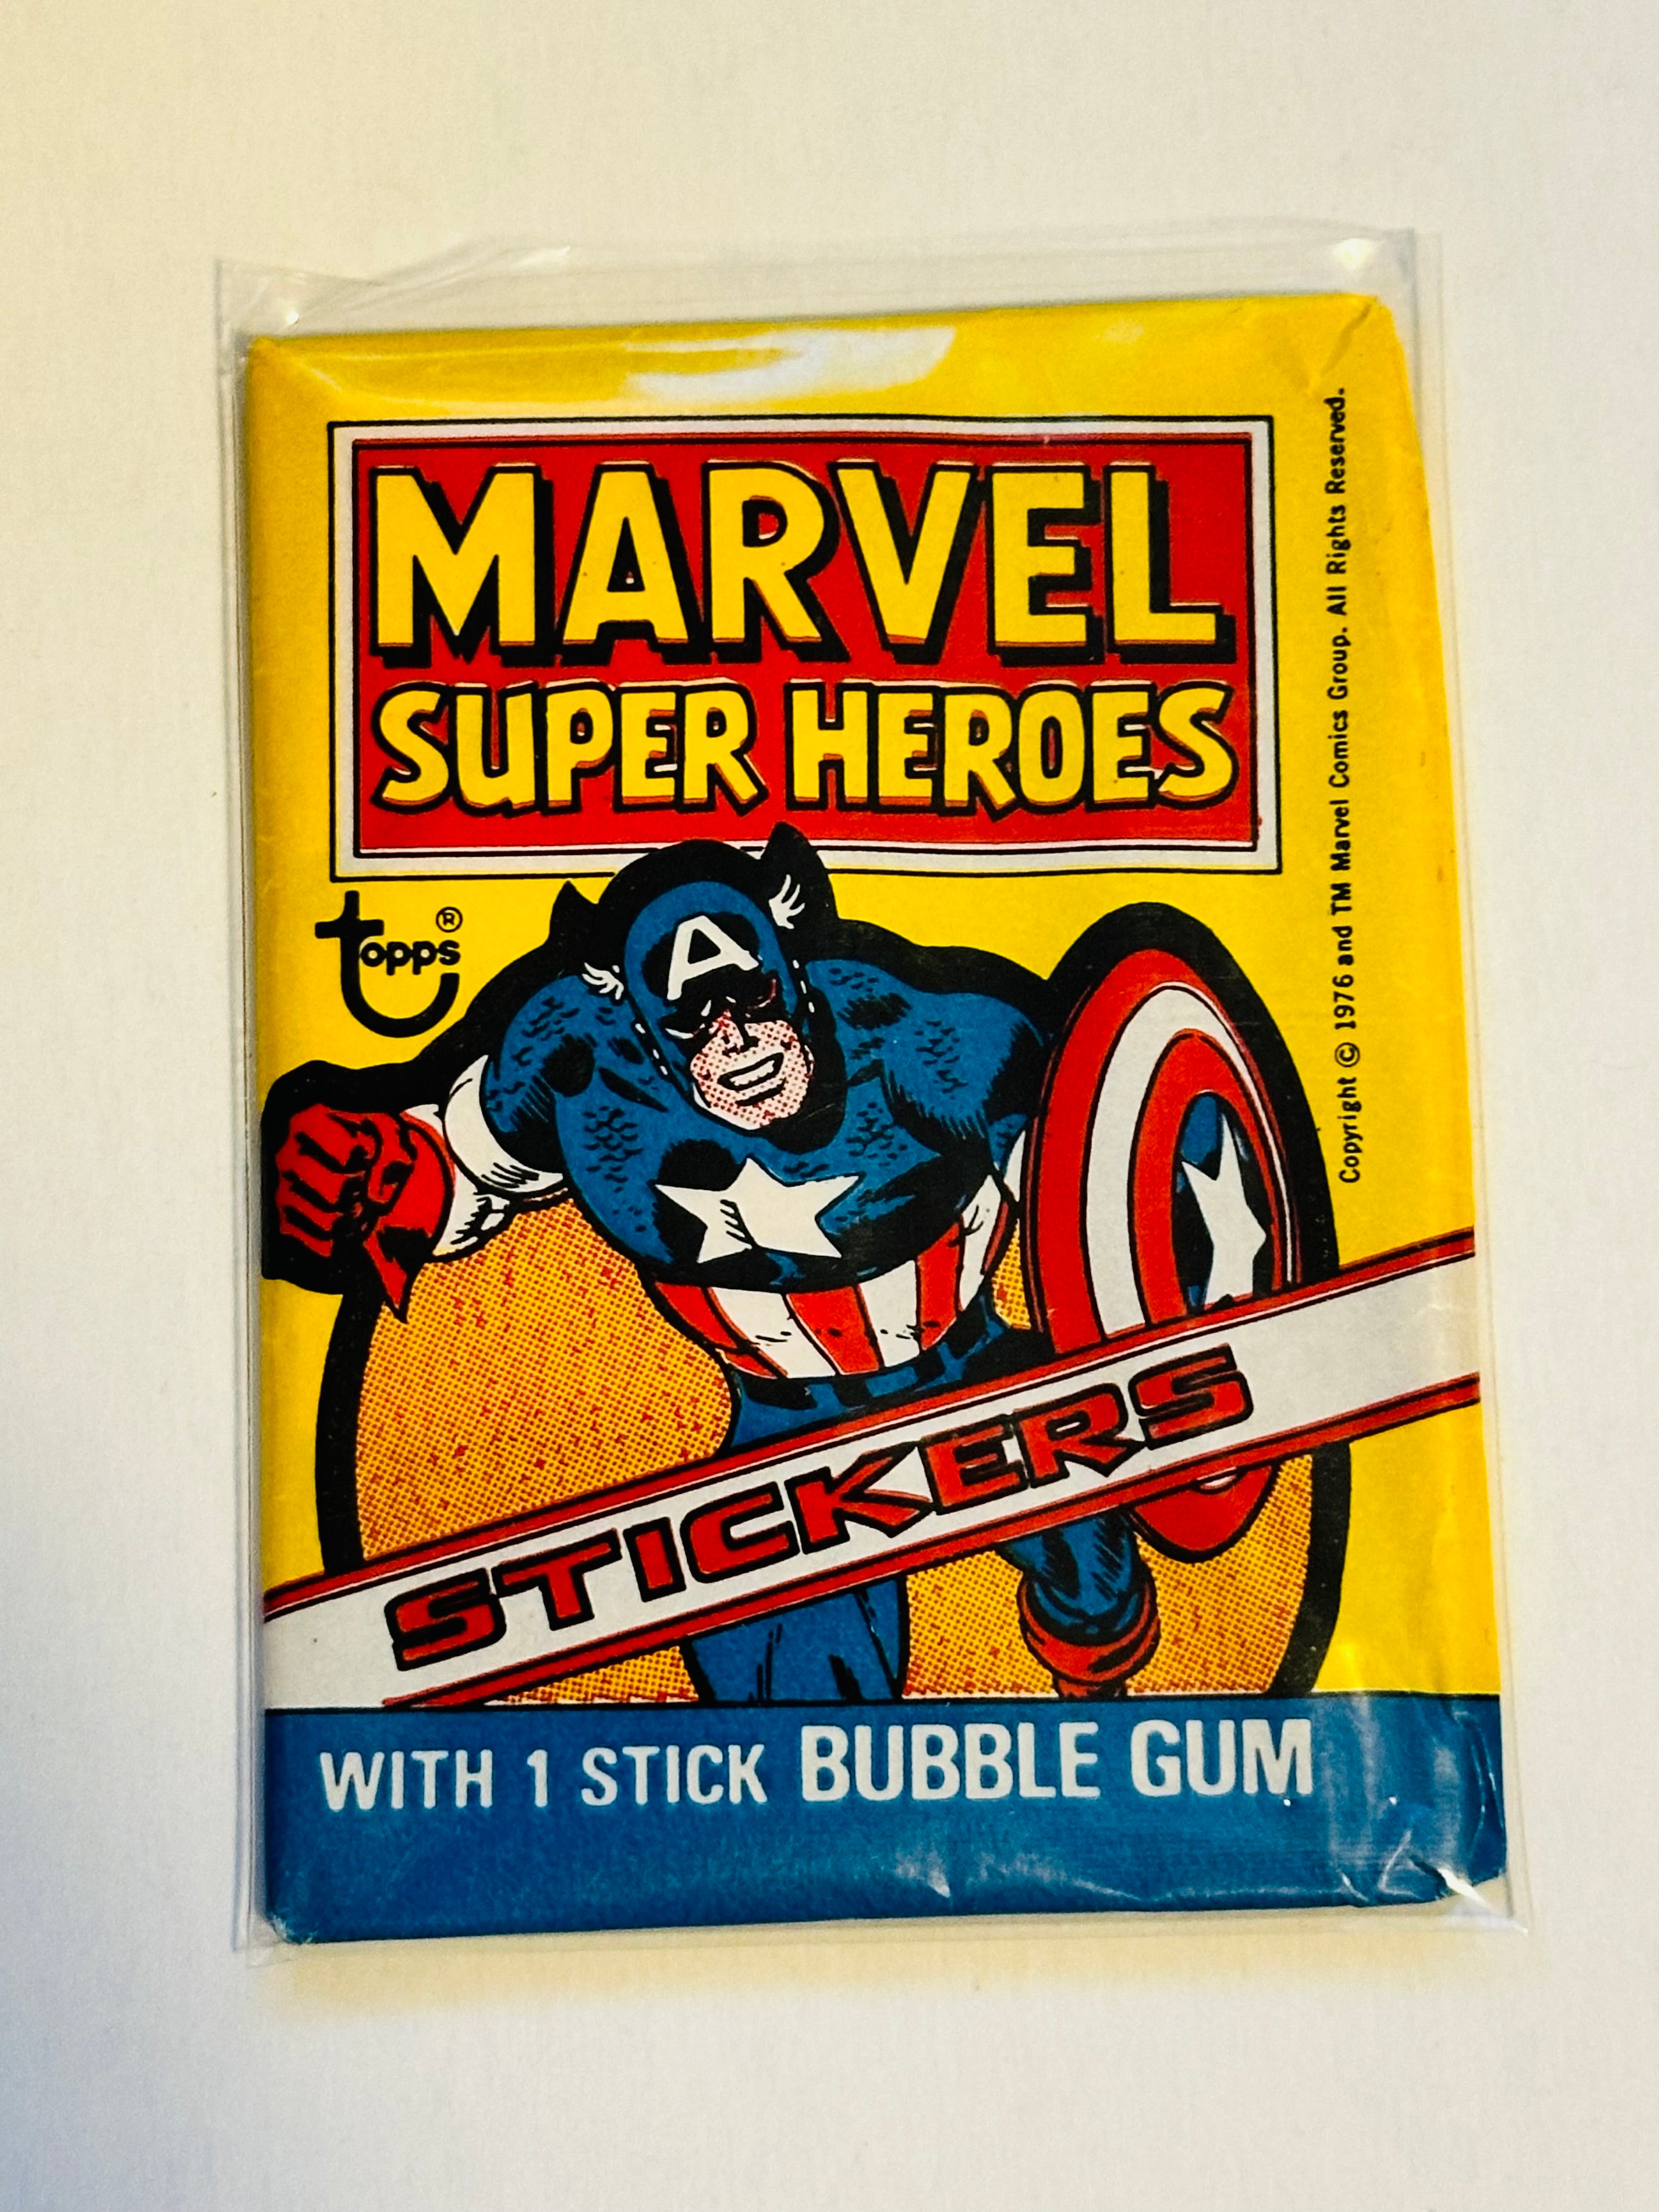 1976 captain America Topps, Marvel superheroes cards seal pack